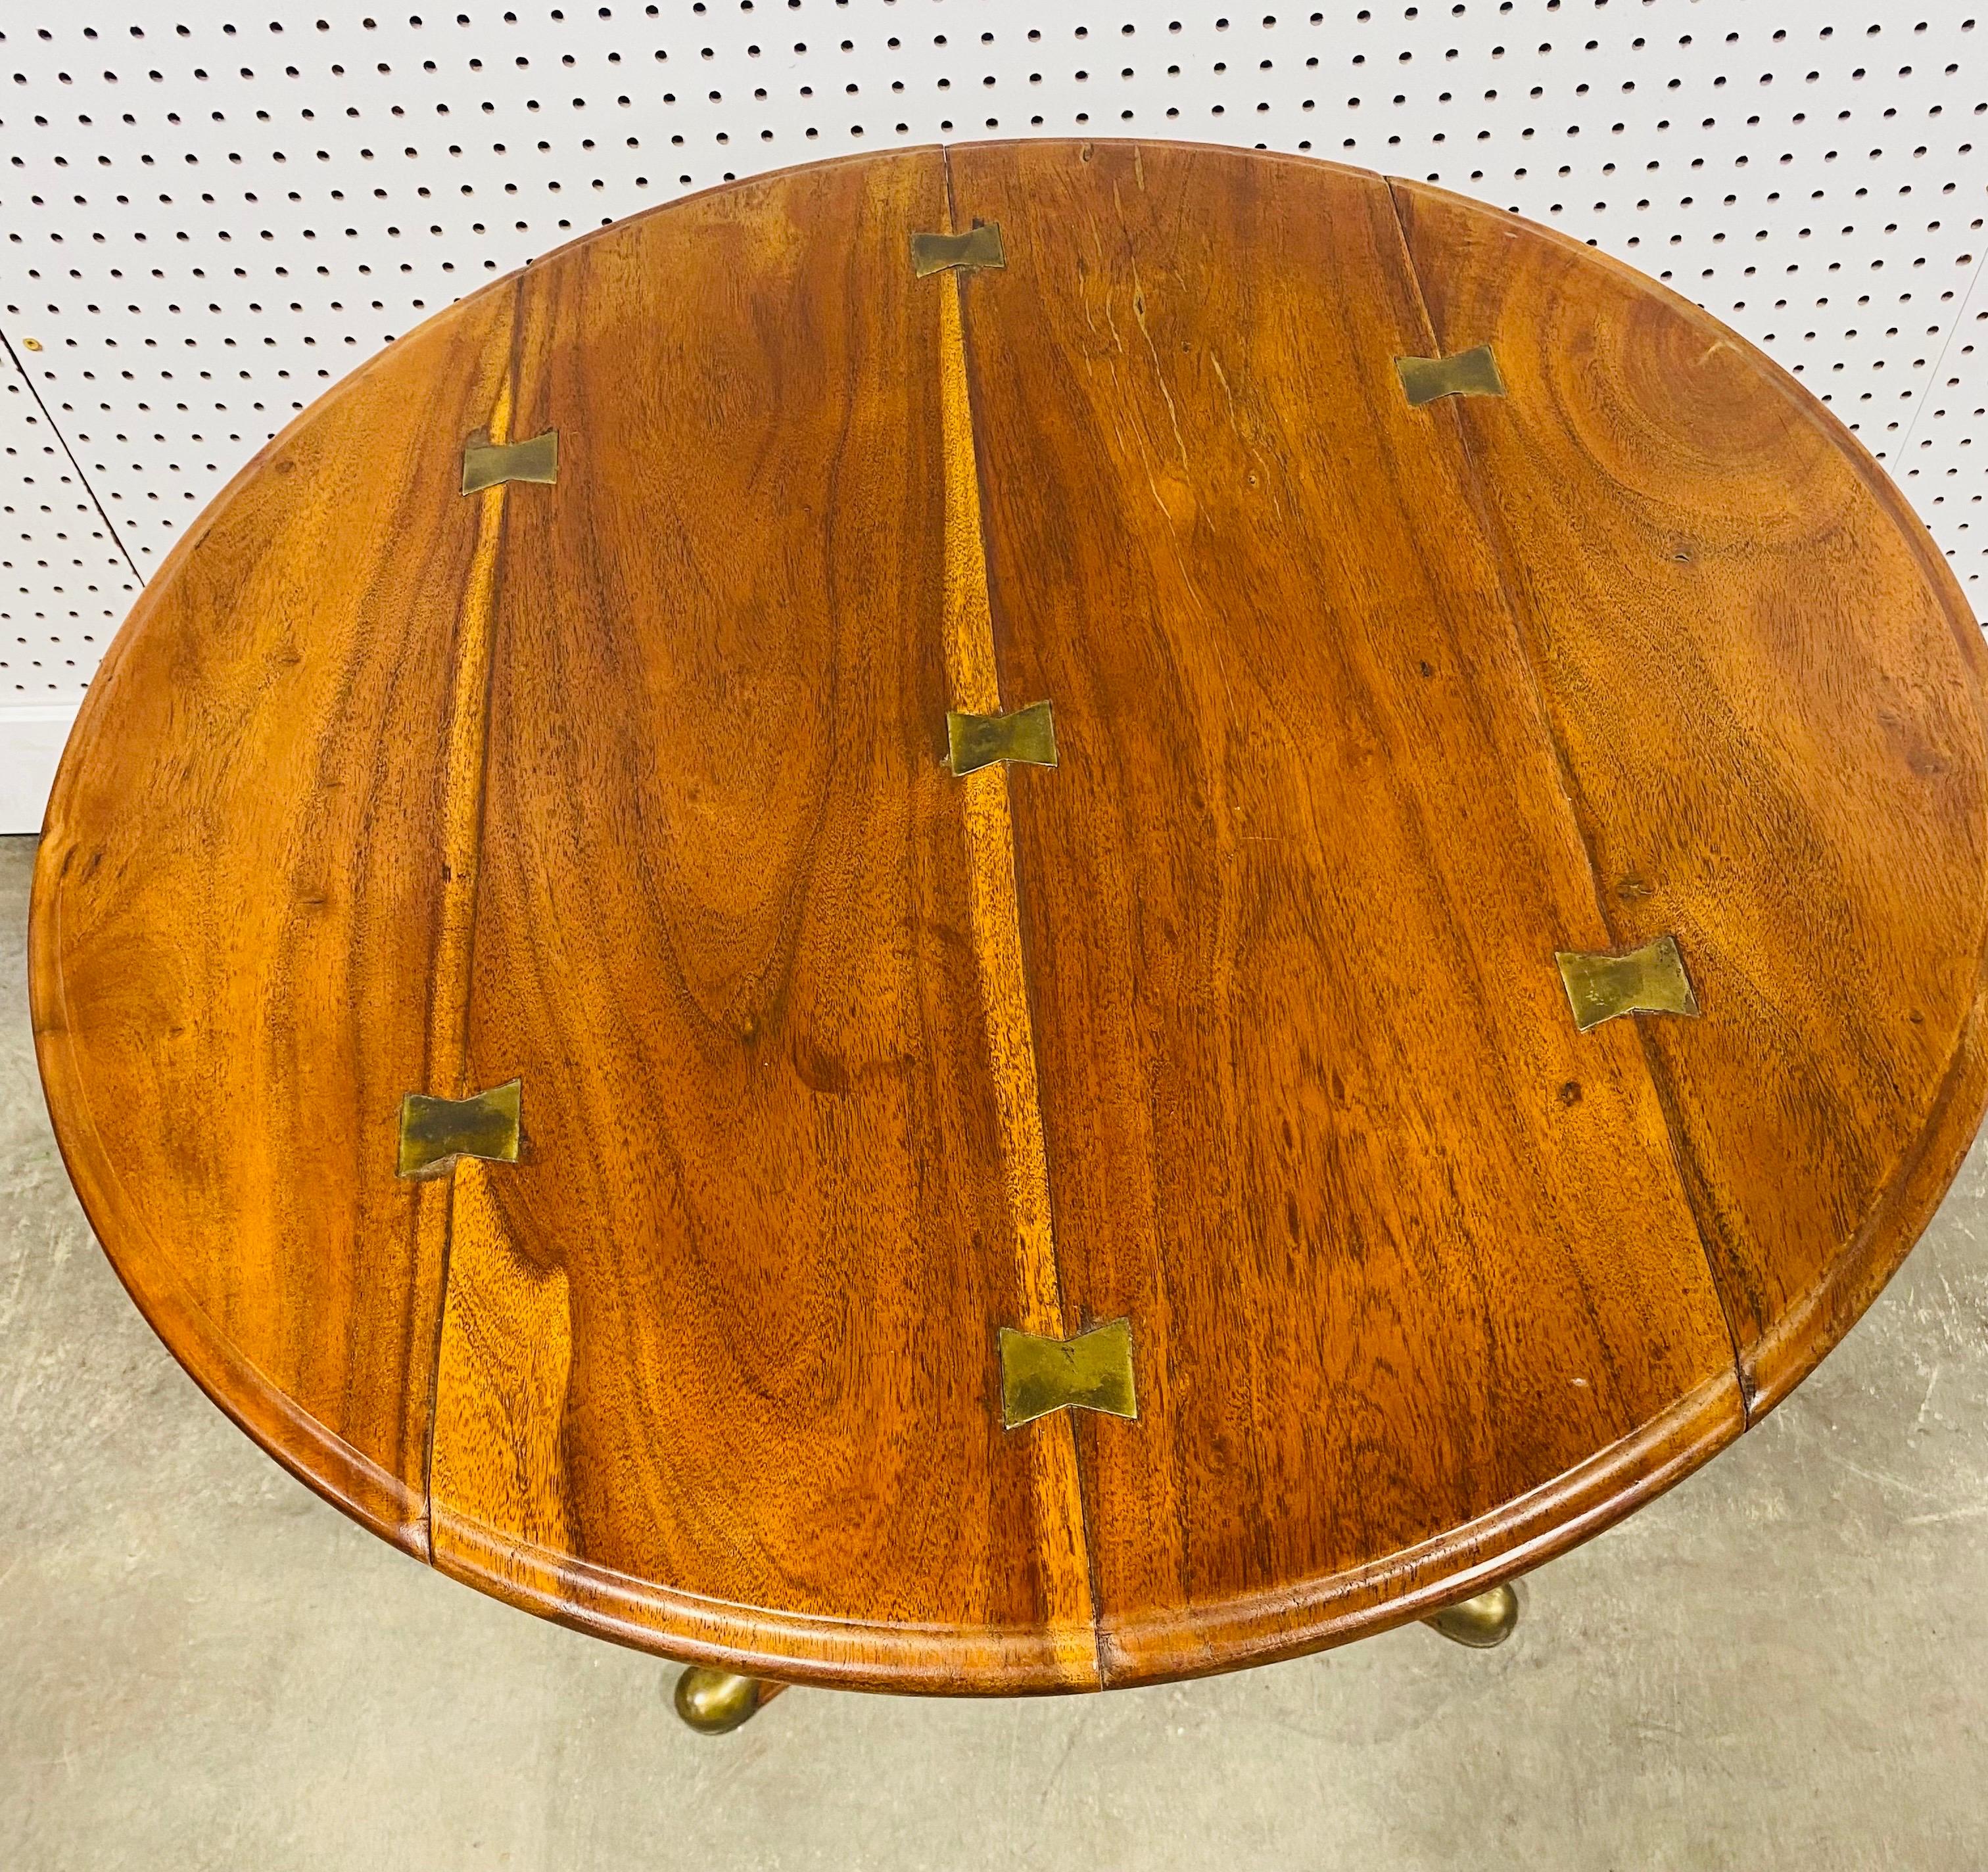 This is a walnut and brass handcraft classical style side table by Theodore Alexander. This table has a classic queen ann leg with brass accents on the end of each foot. The table has brass butterfly details to the top. This Theodore Alexander table